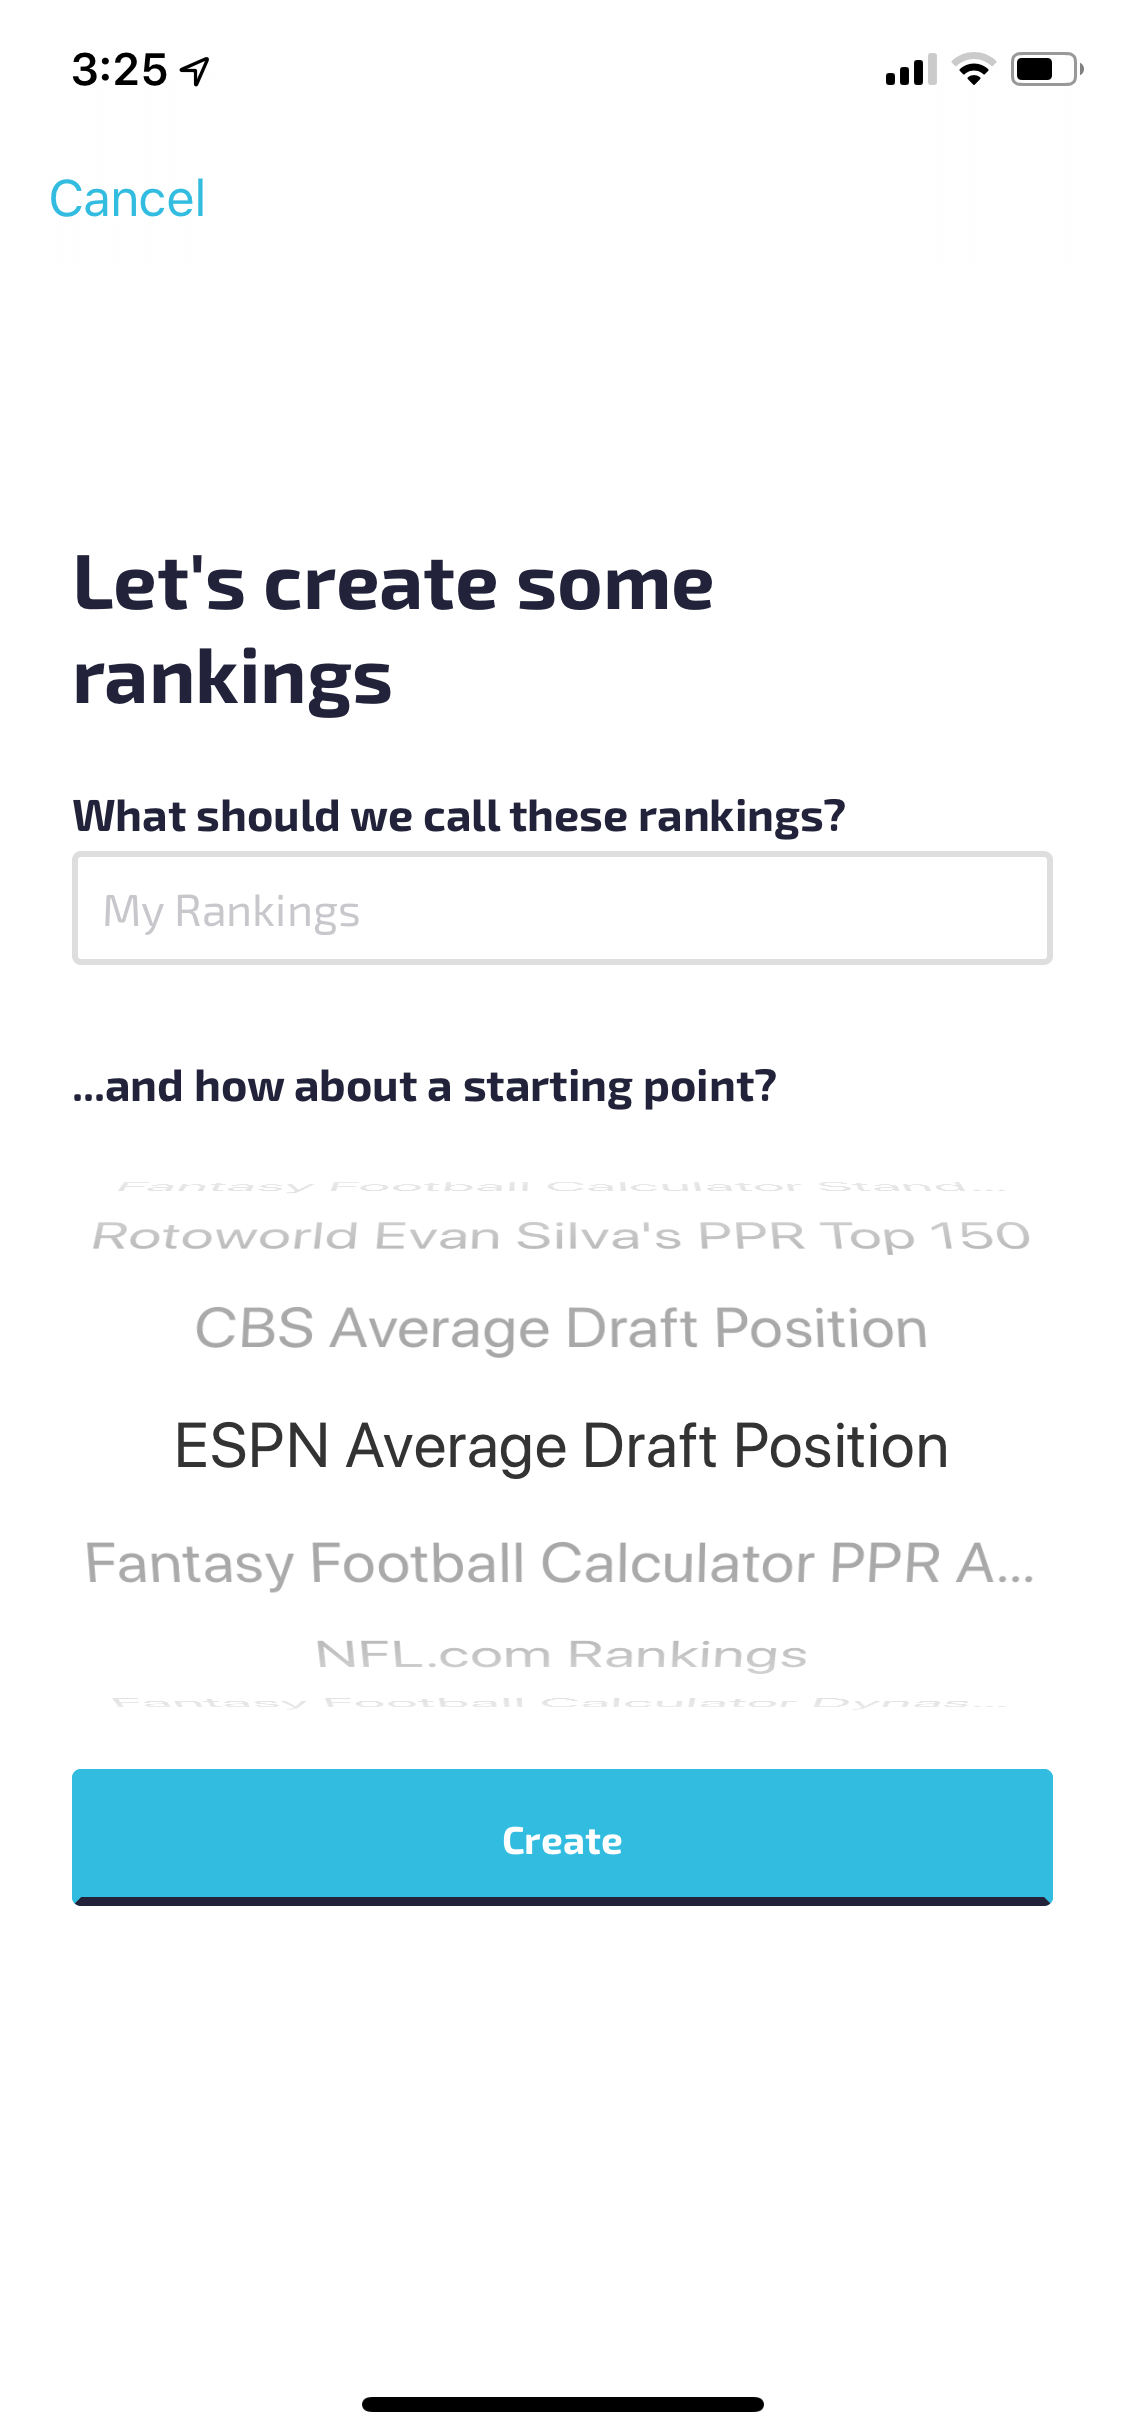 Download the app and start building your rankings to prepare for draft day